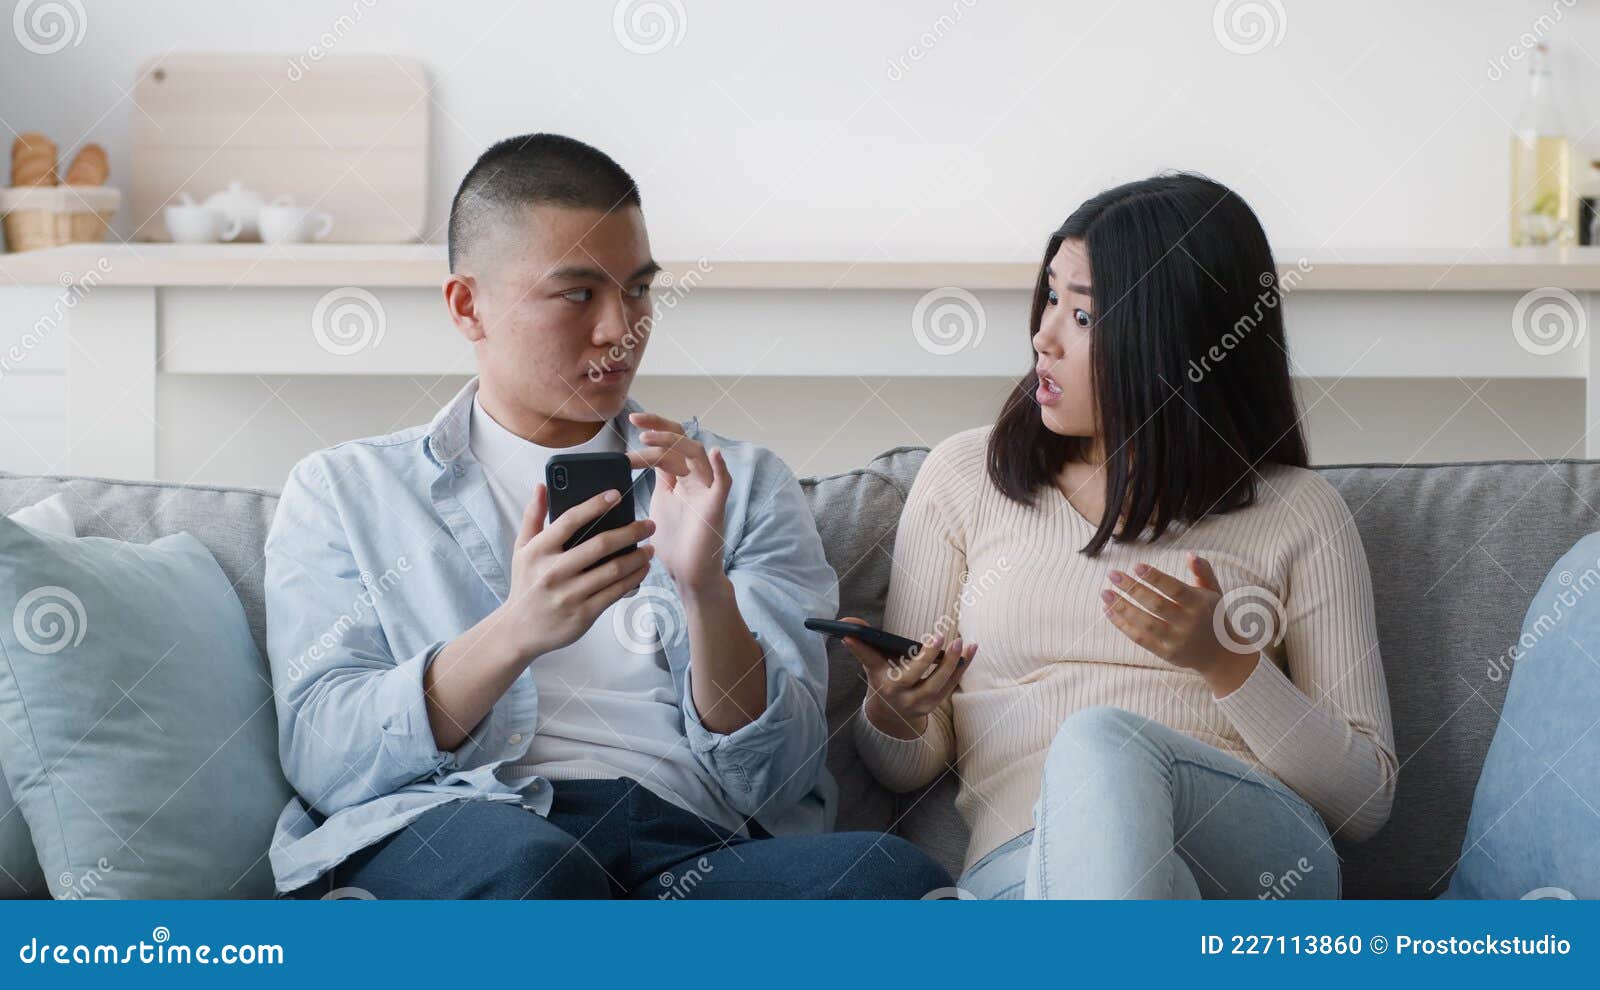 Asian Wife Catching Cheating Husband on Texting with Lover Indoor Stock Footage